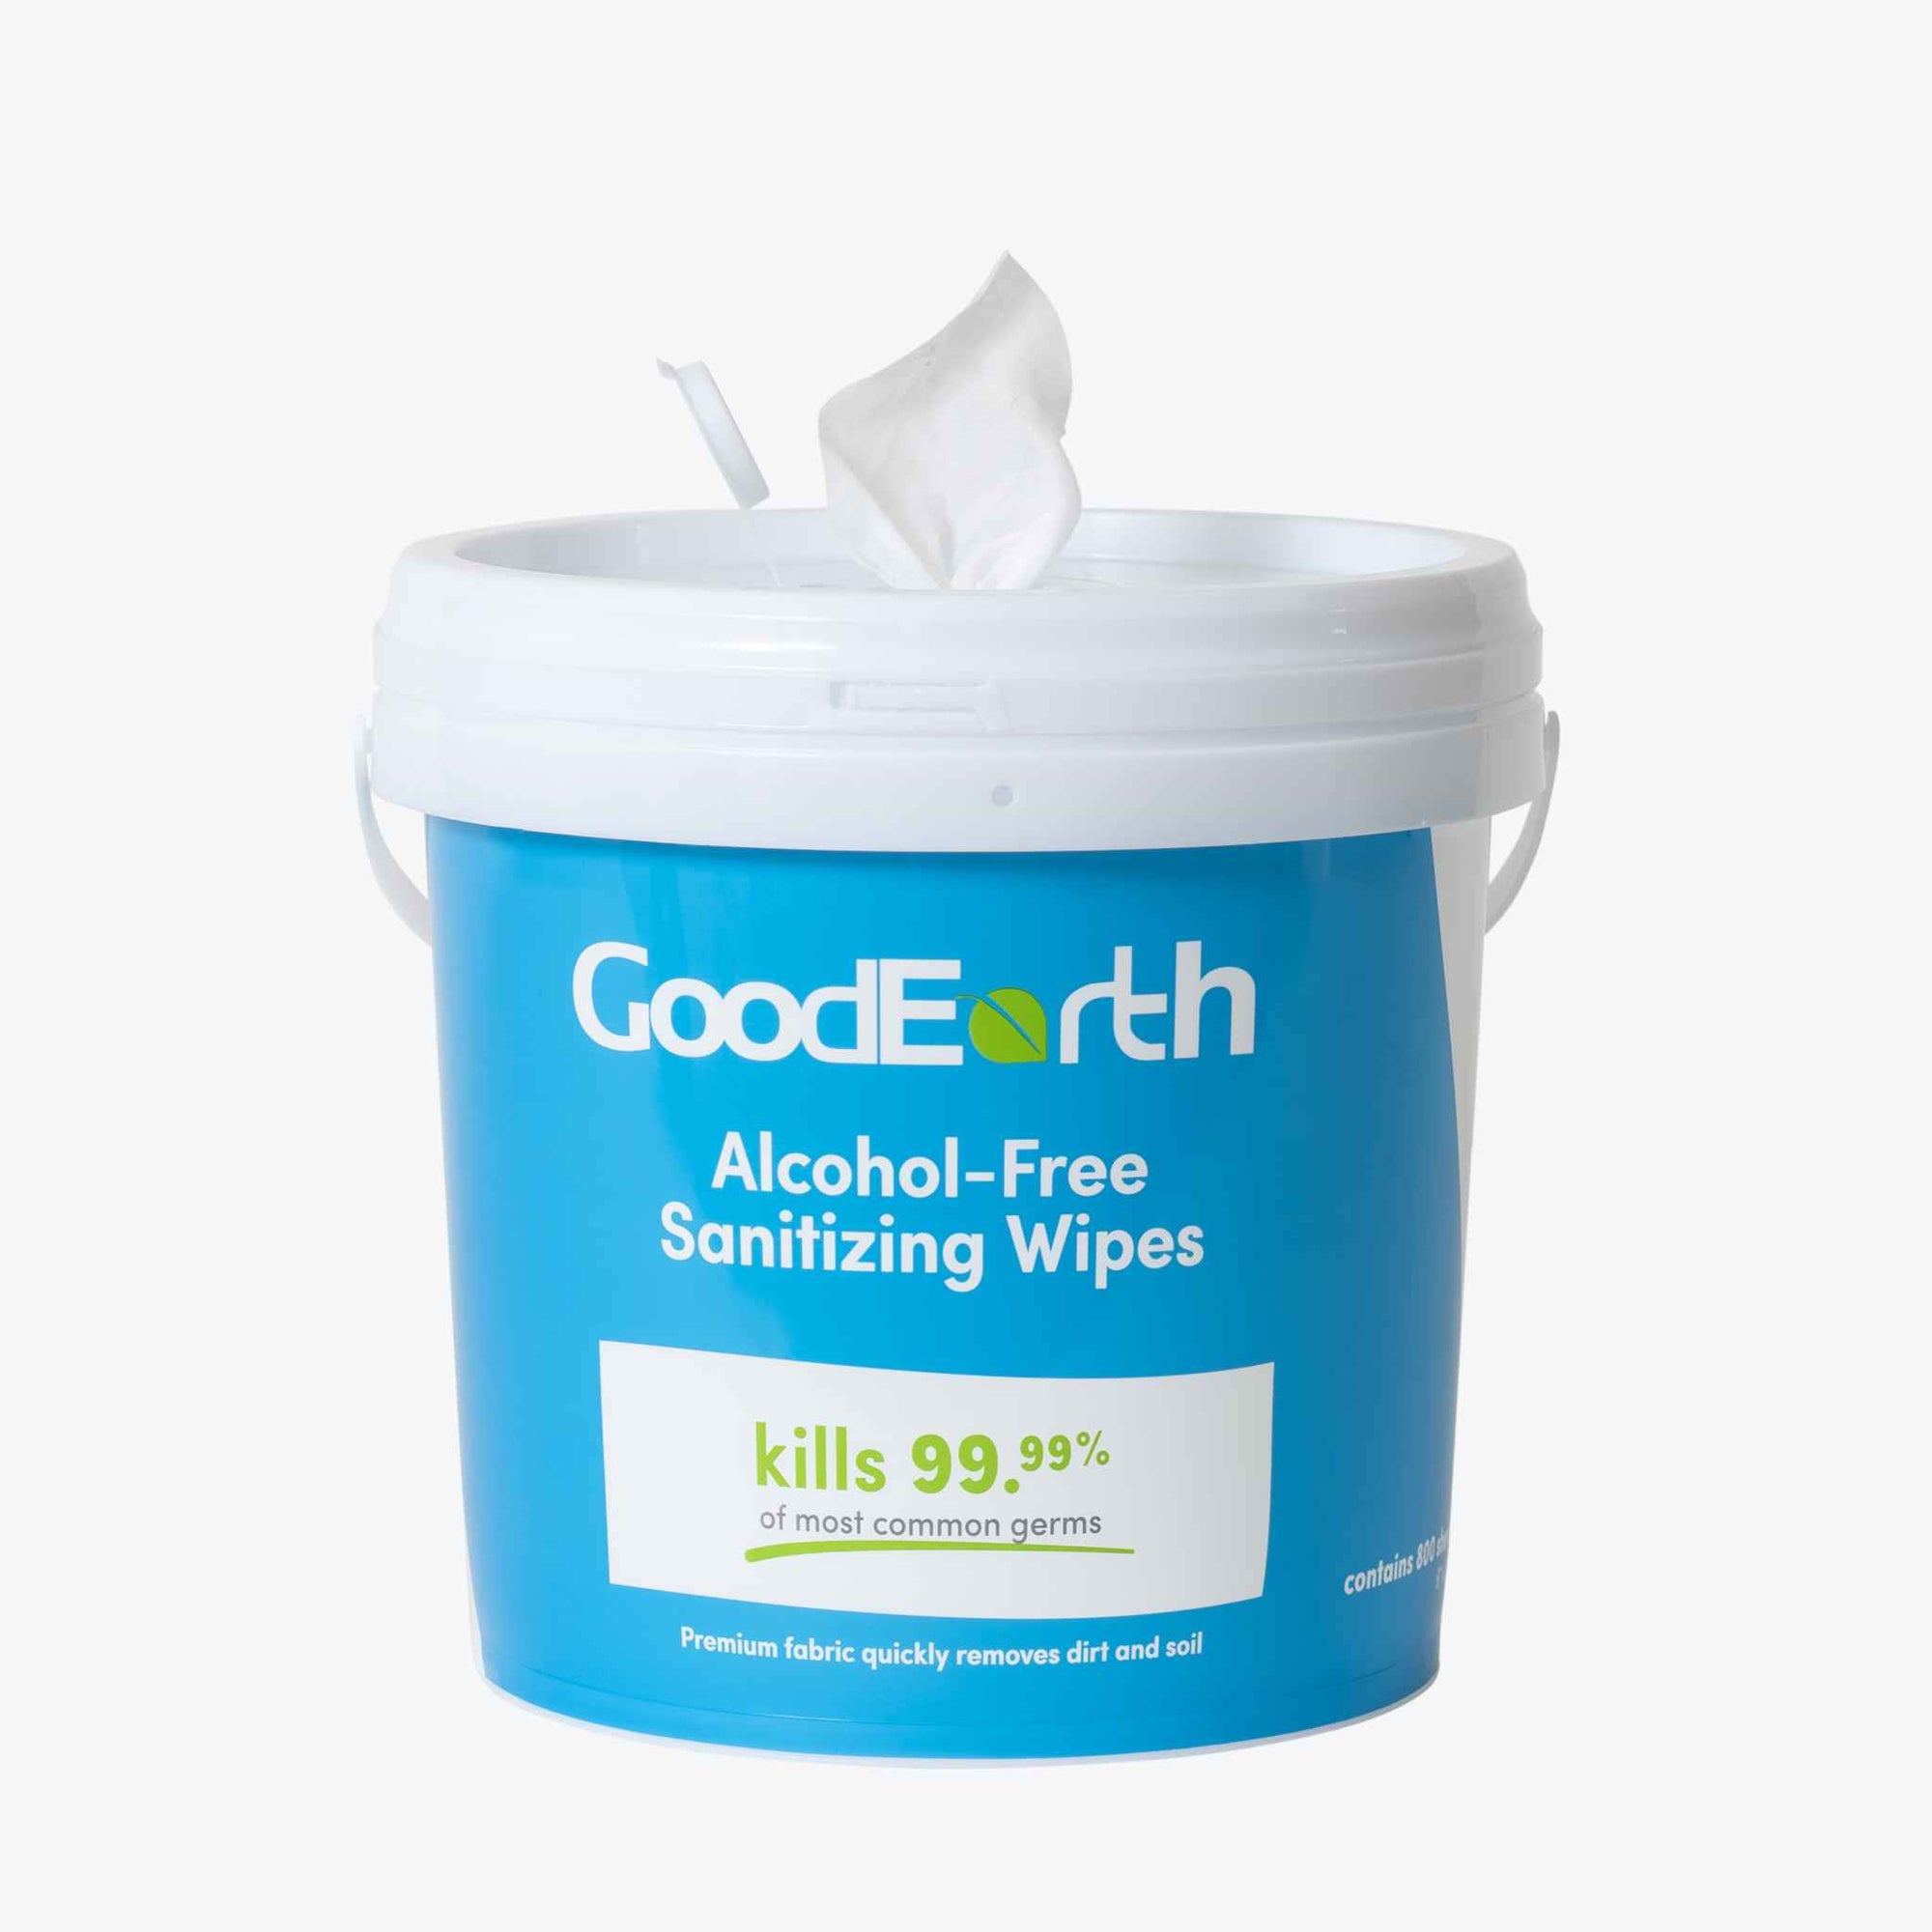 GoodEarth Sanitizing Wipes Bucket - 3200 Total Wipes (800 Wipes per Bucket; 4 Buckets per case) accessory GoodEarth 